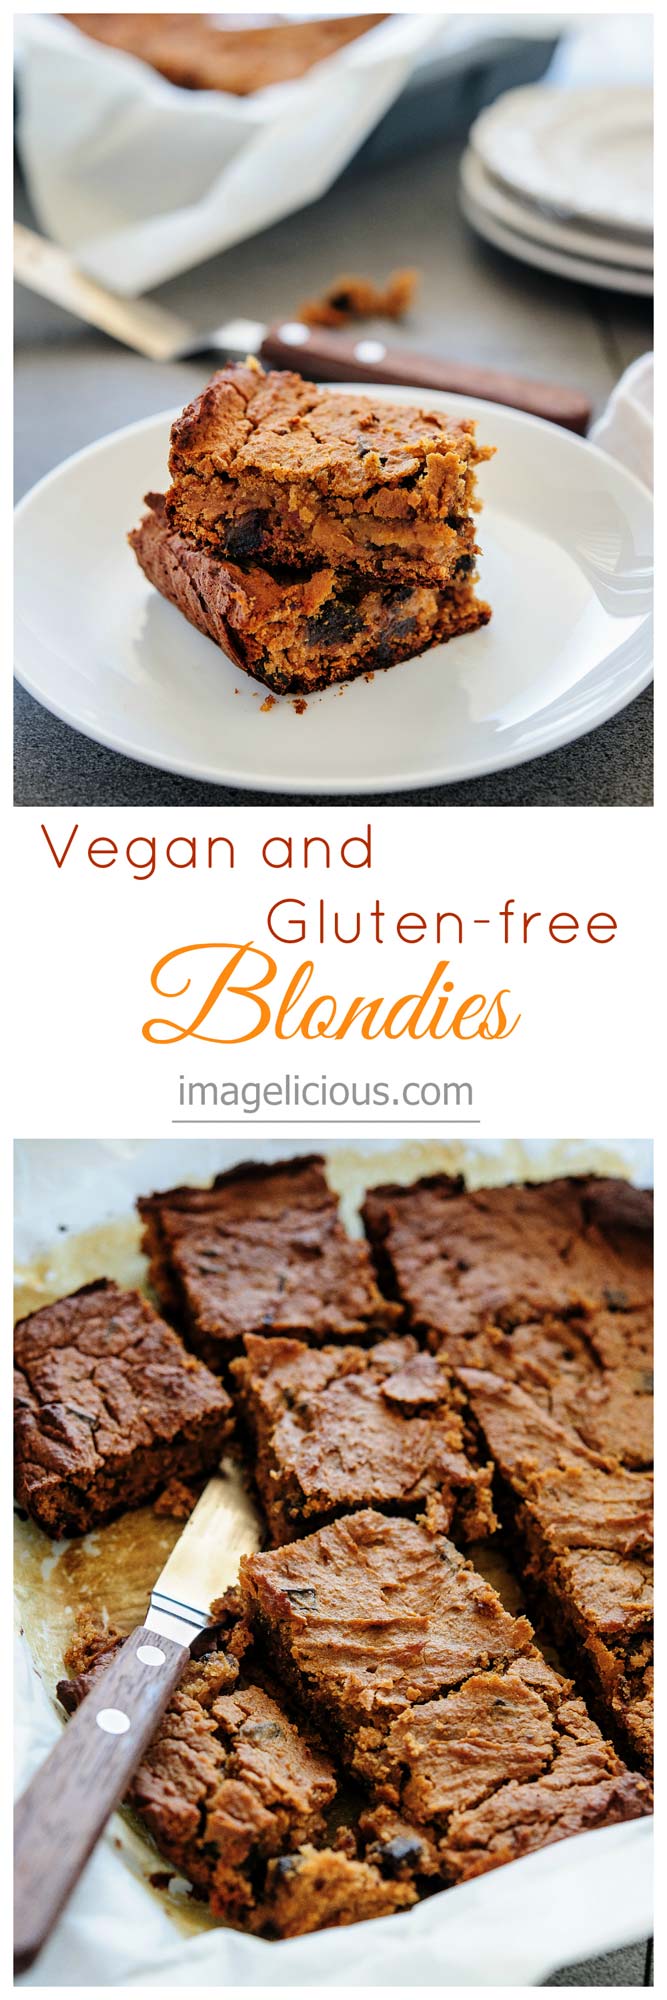 These Vegan and Gluten-free Blondies are not only delicious, but also healthy. Made with dates, maple syrup, peanut butter and chickpeas they will satisfy sweet tooth without leaving you feeling guilty | Imagelicious